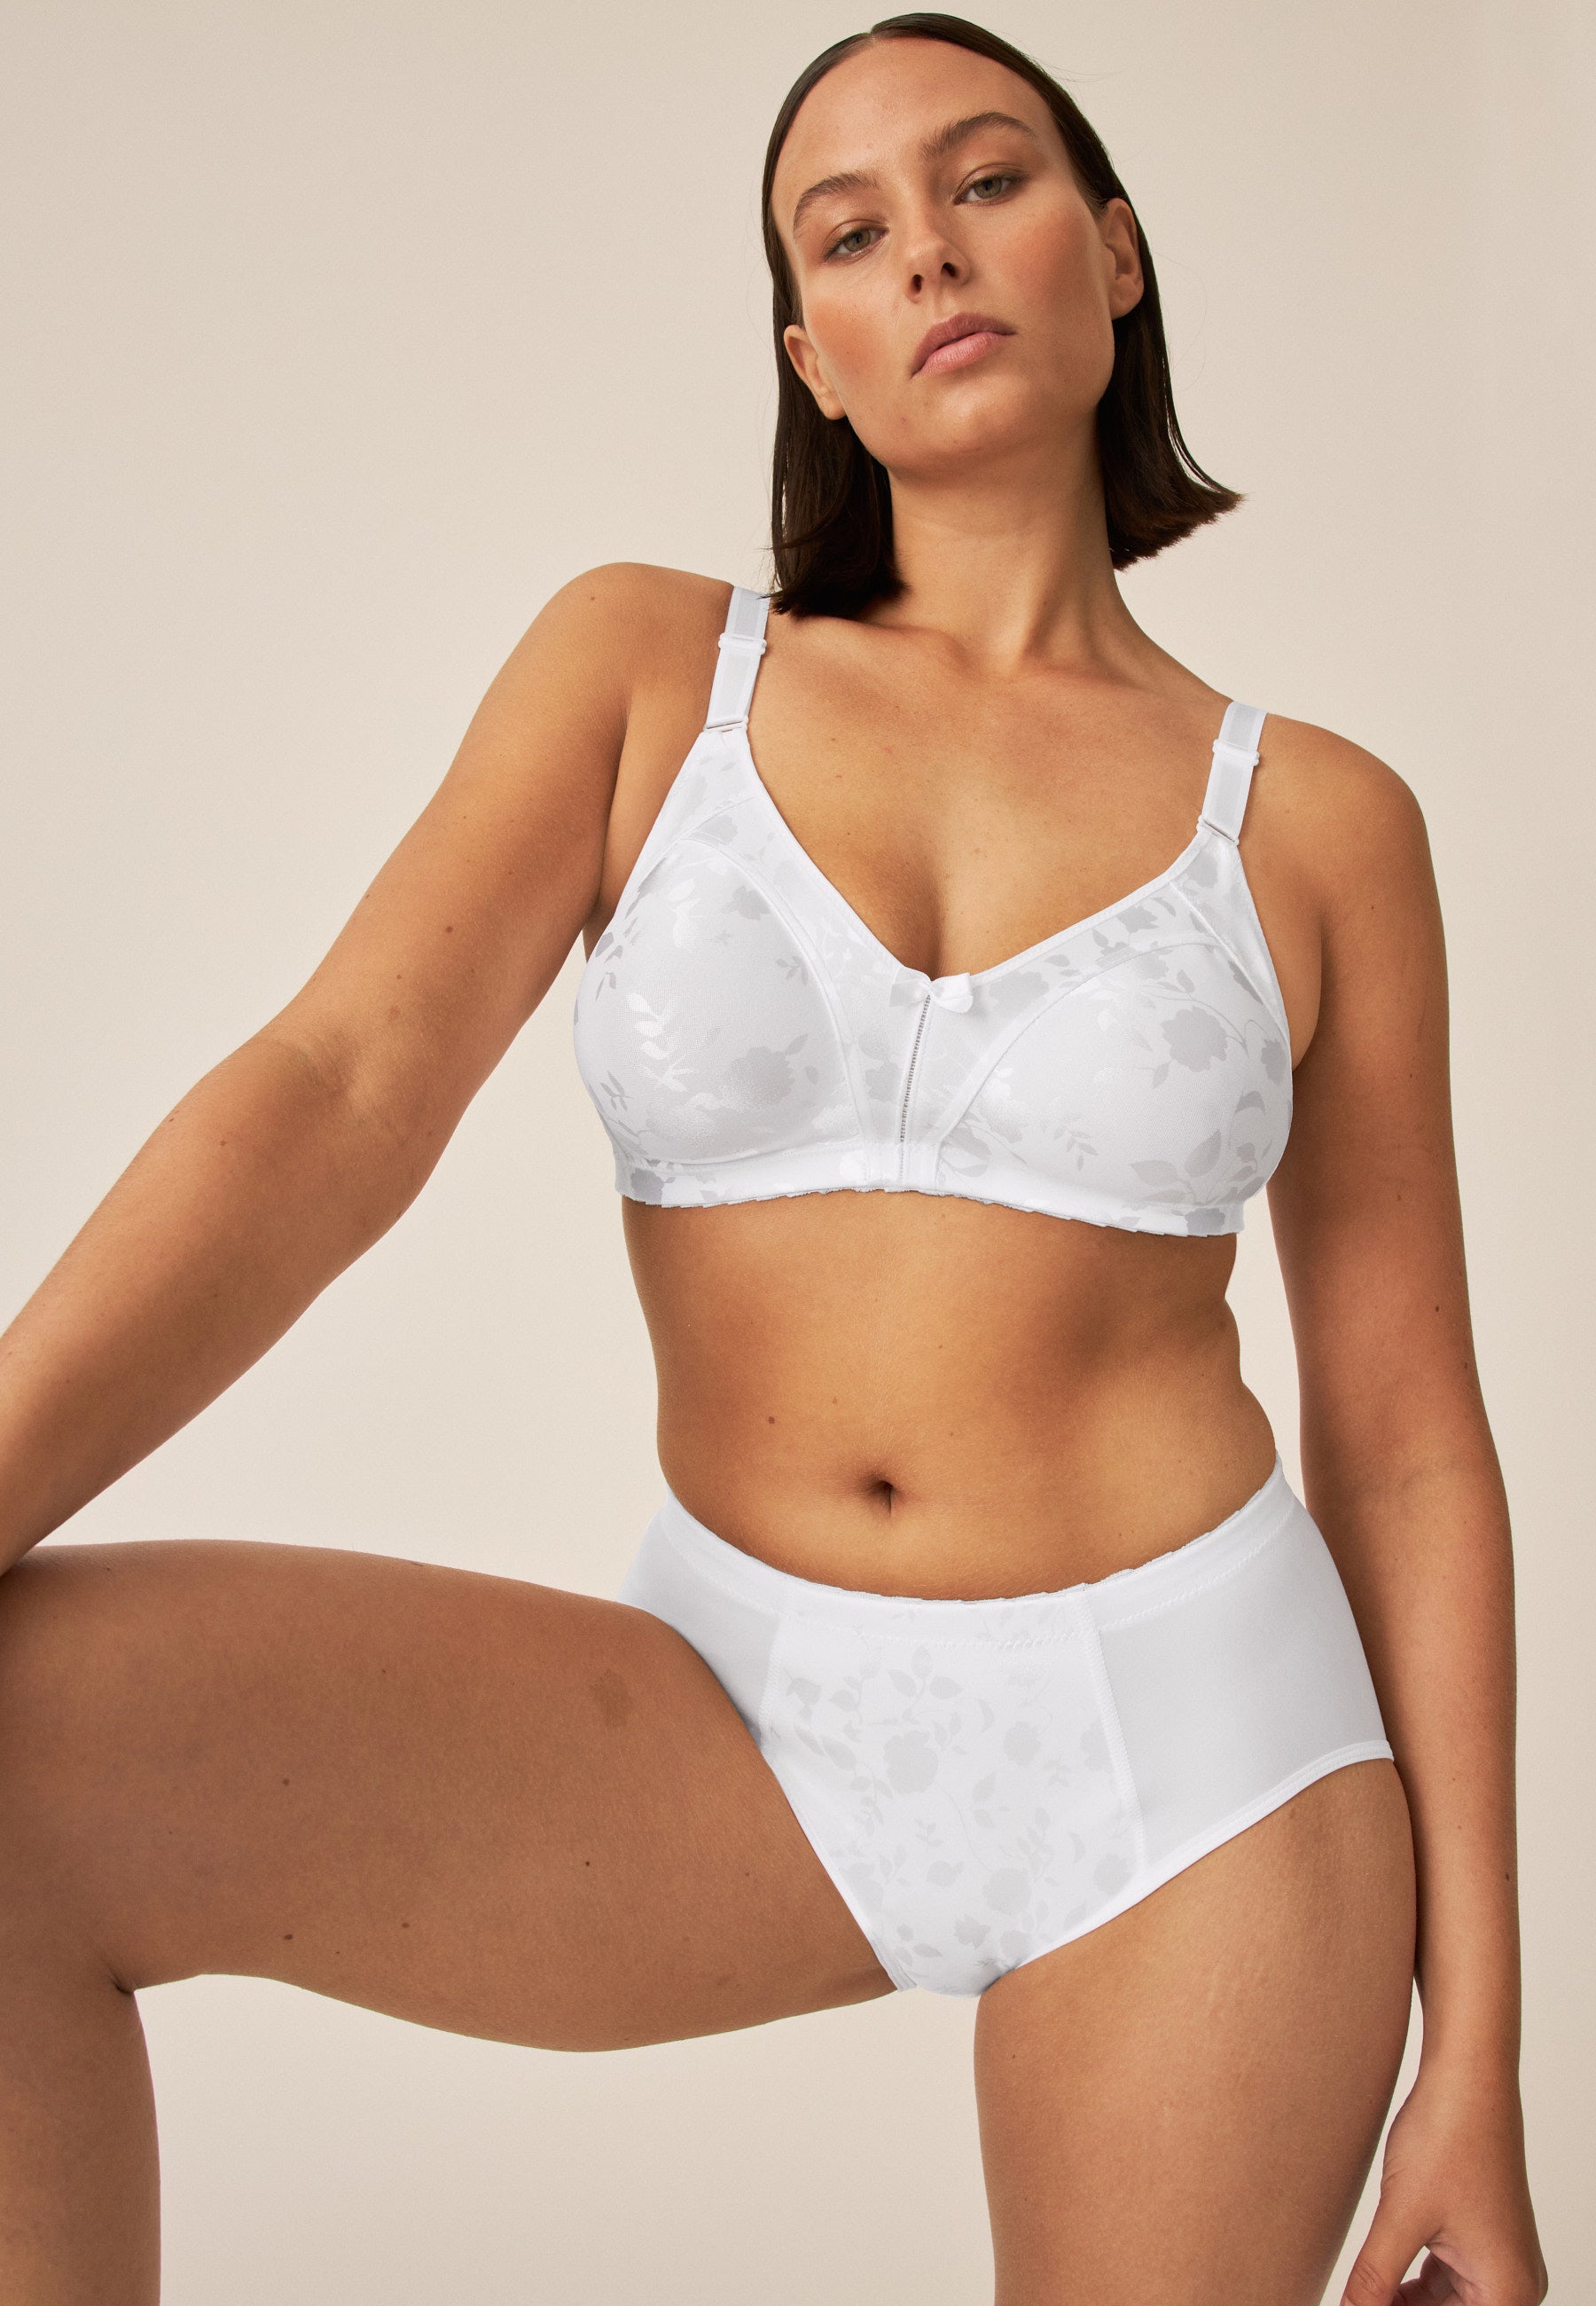 Our favorite bras at a glance - NATURANA